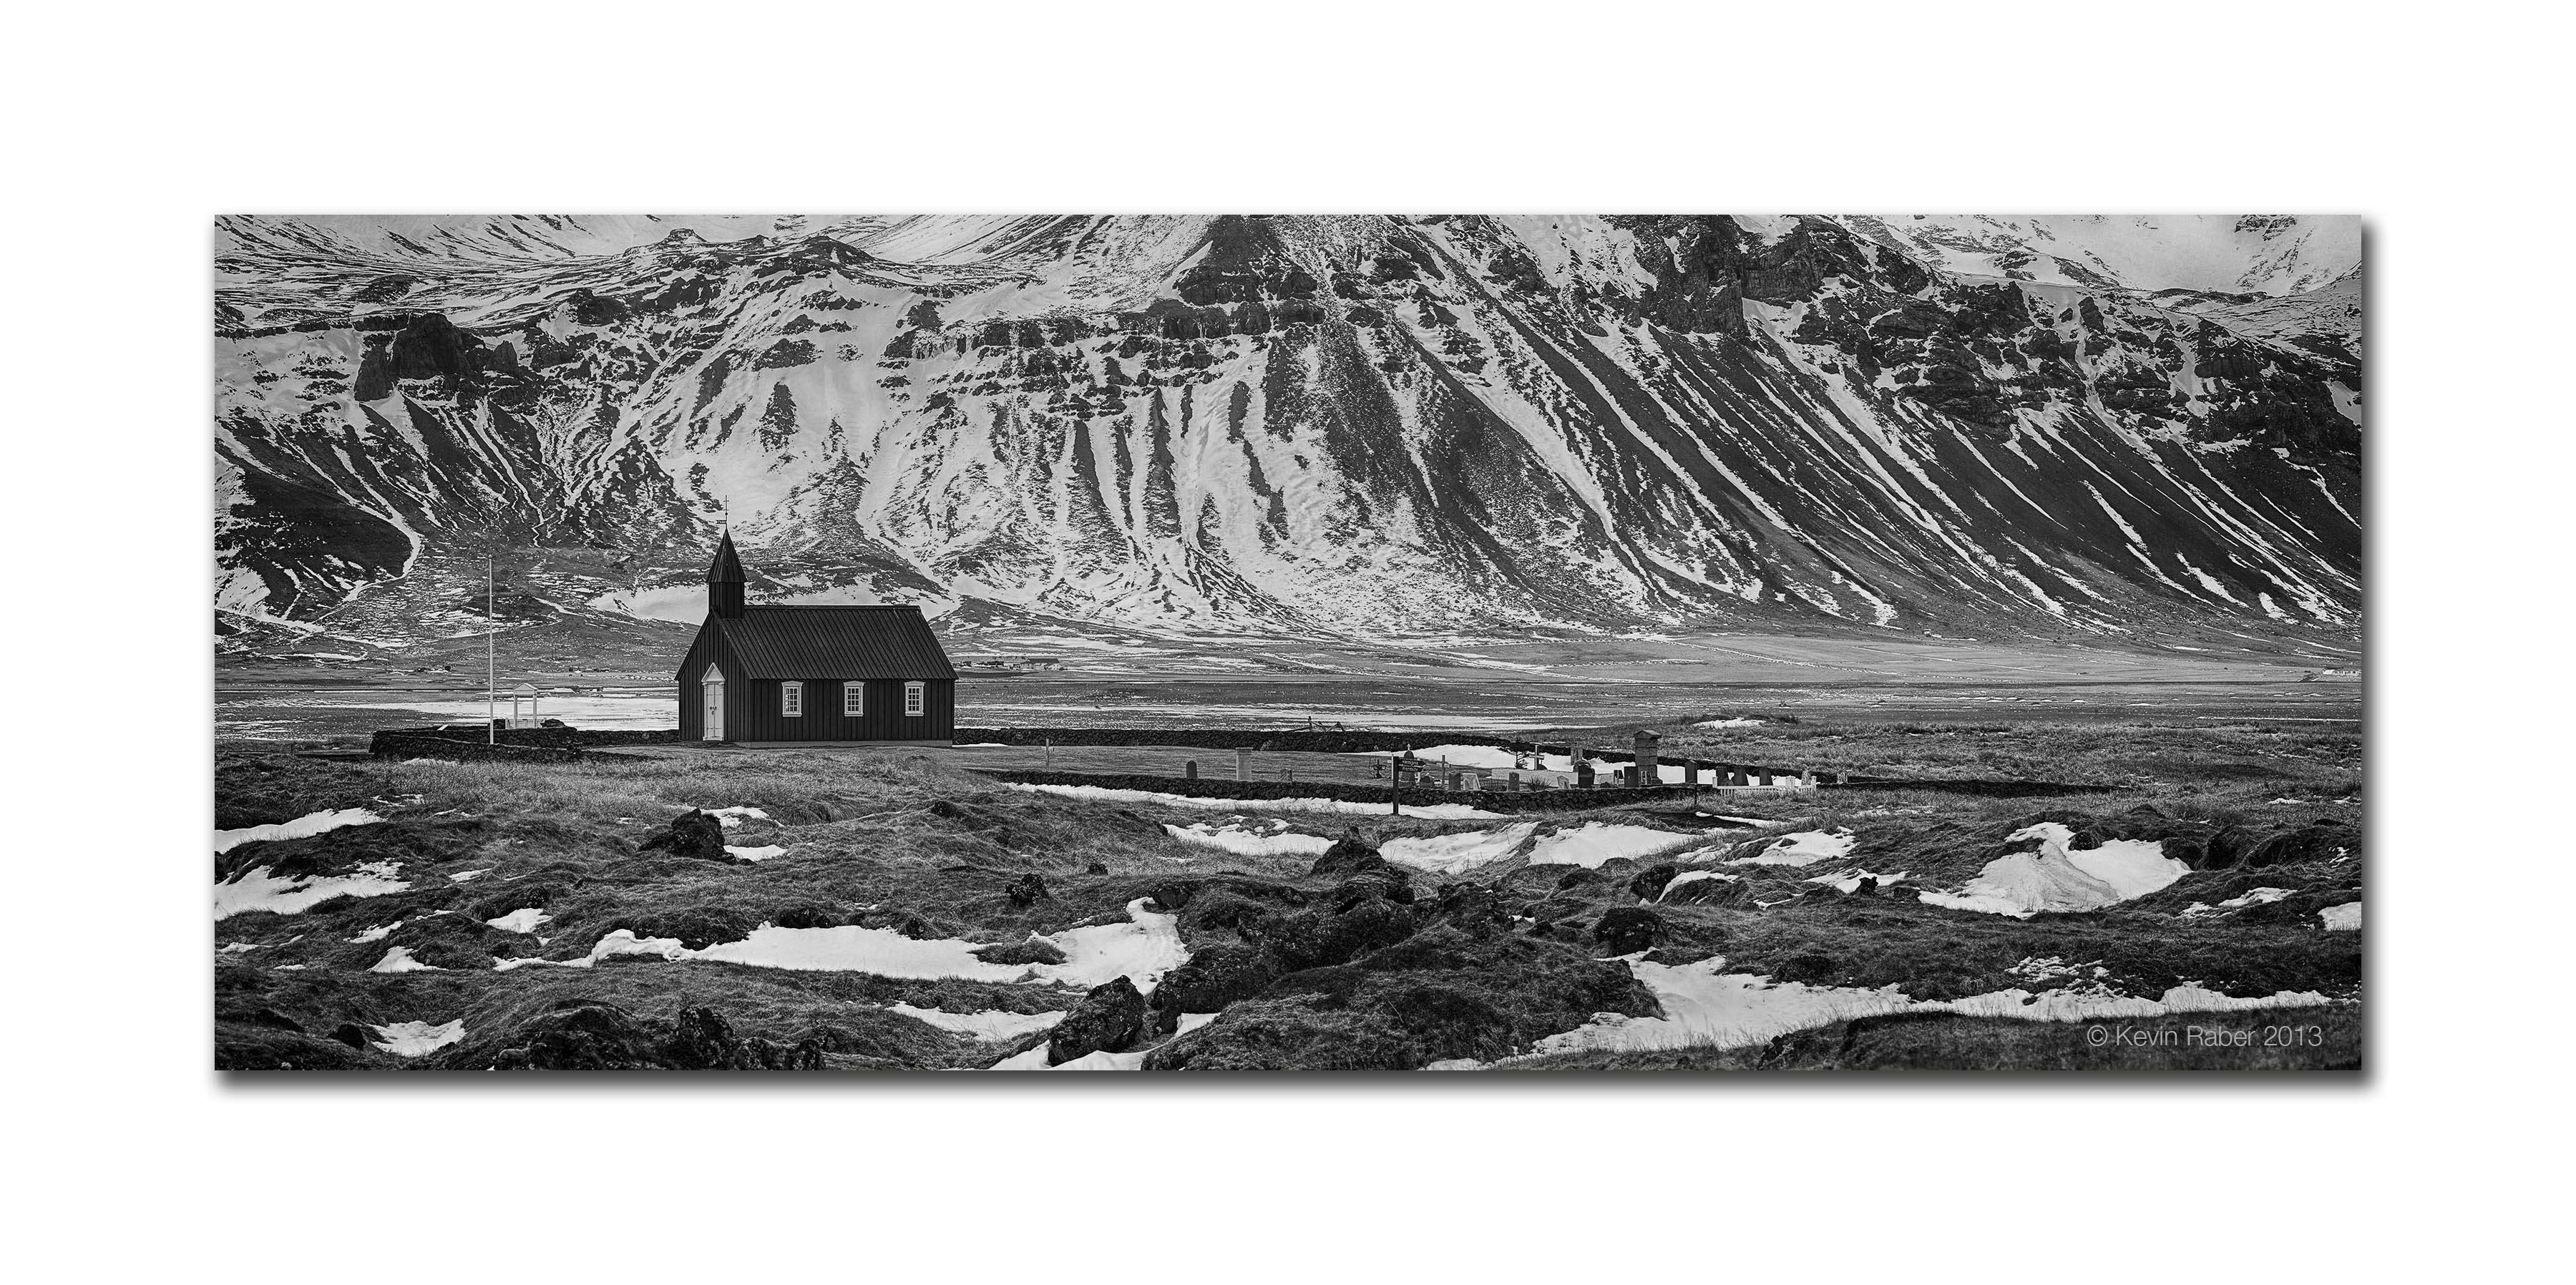 The Black Church, Iceland.  Made with a six image stitch and IQ180